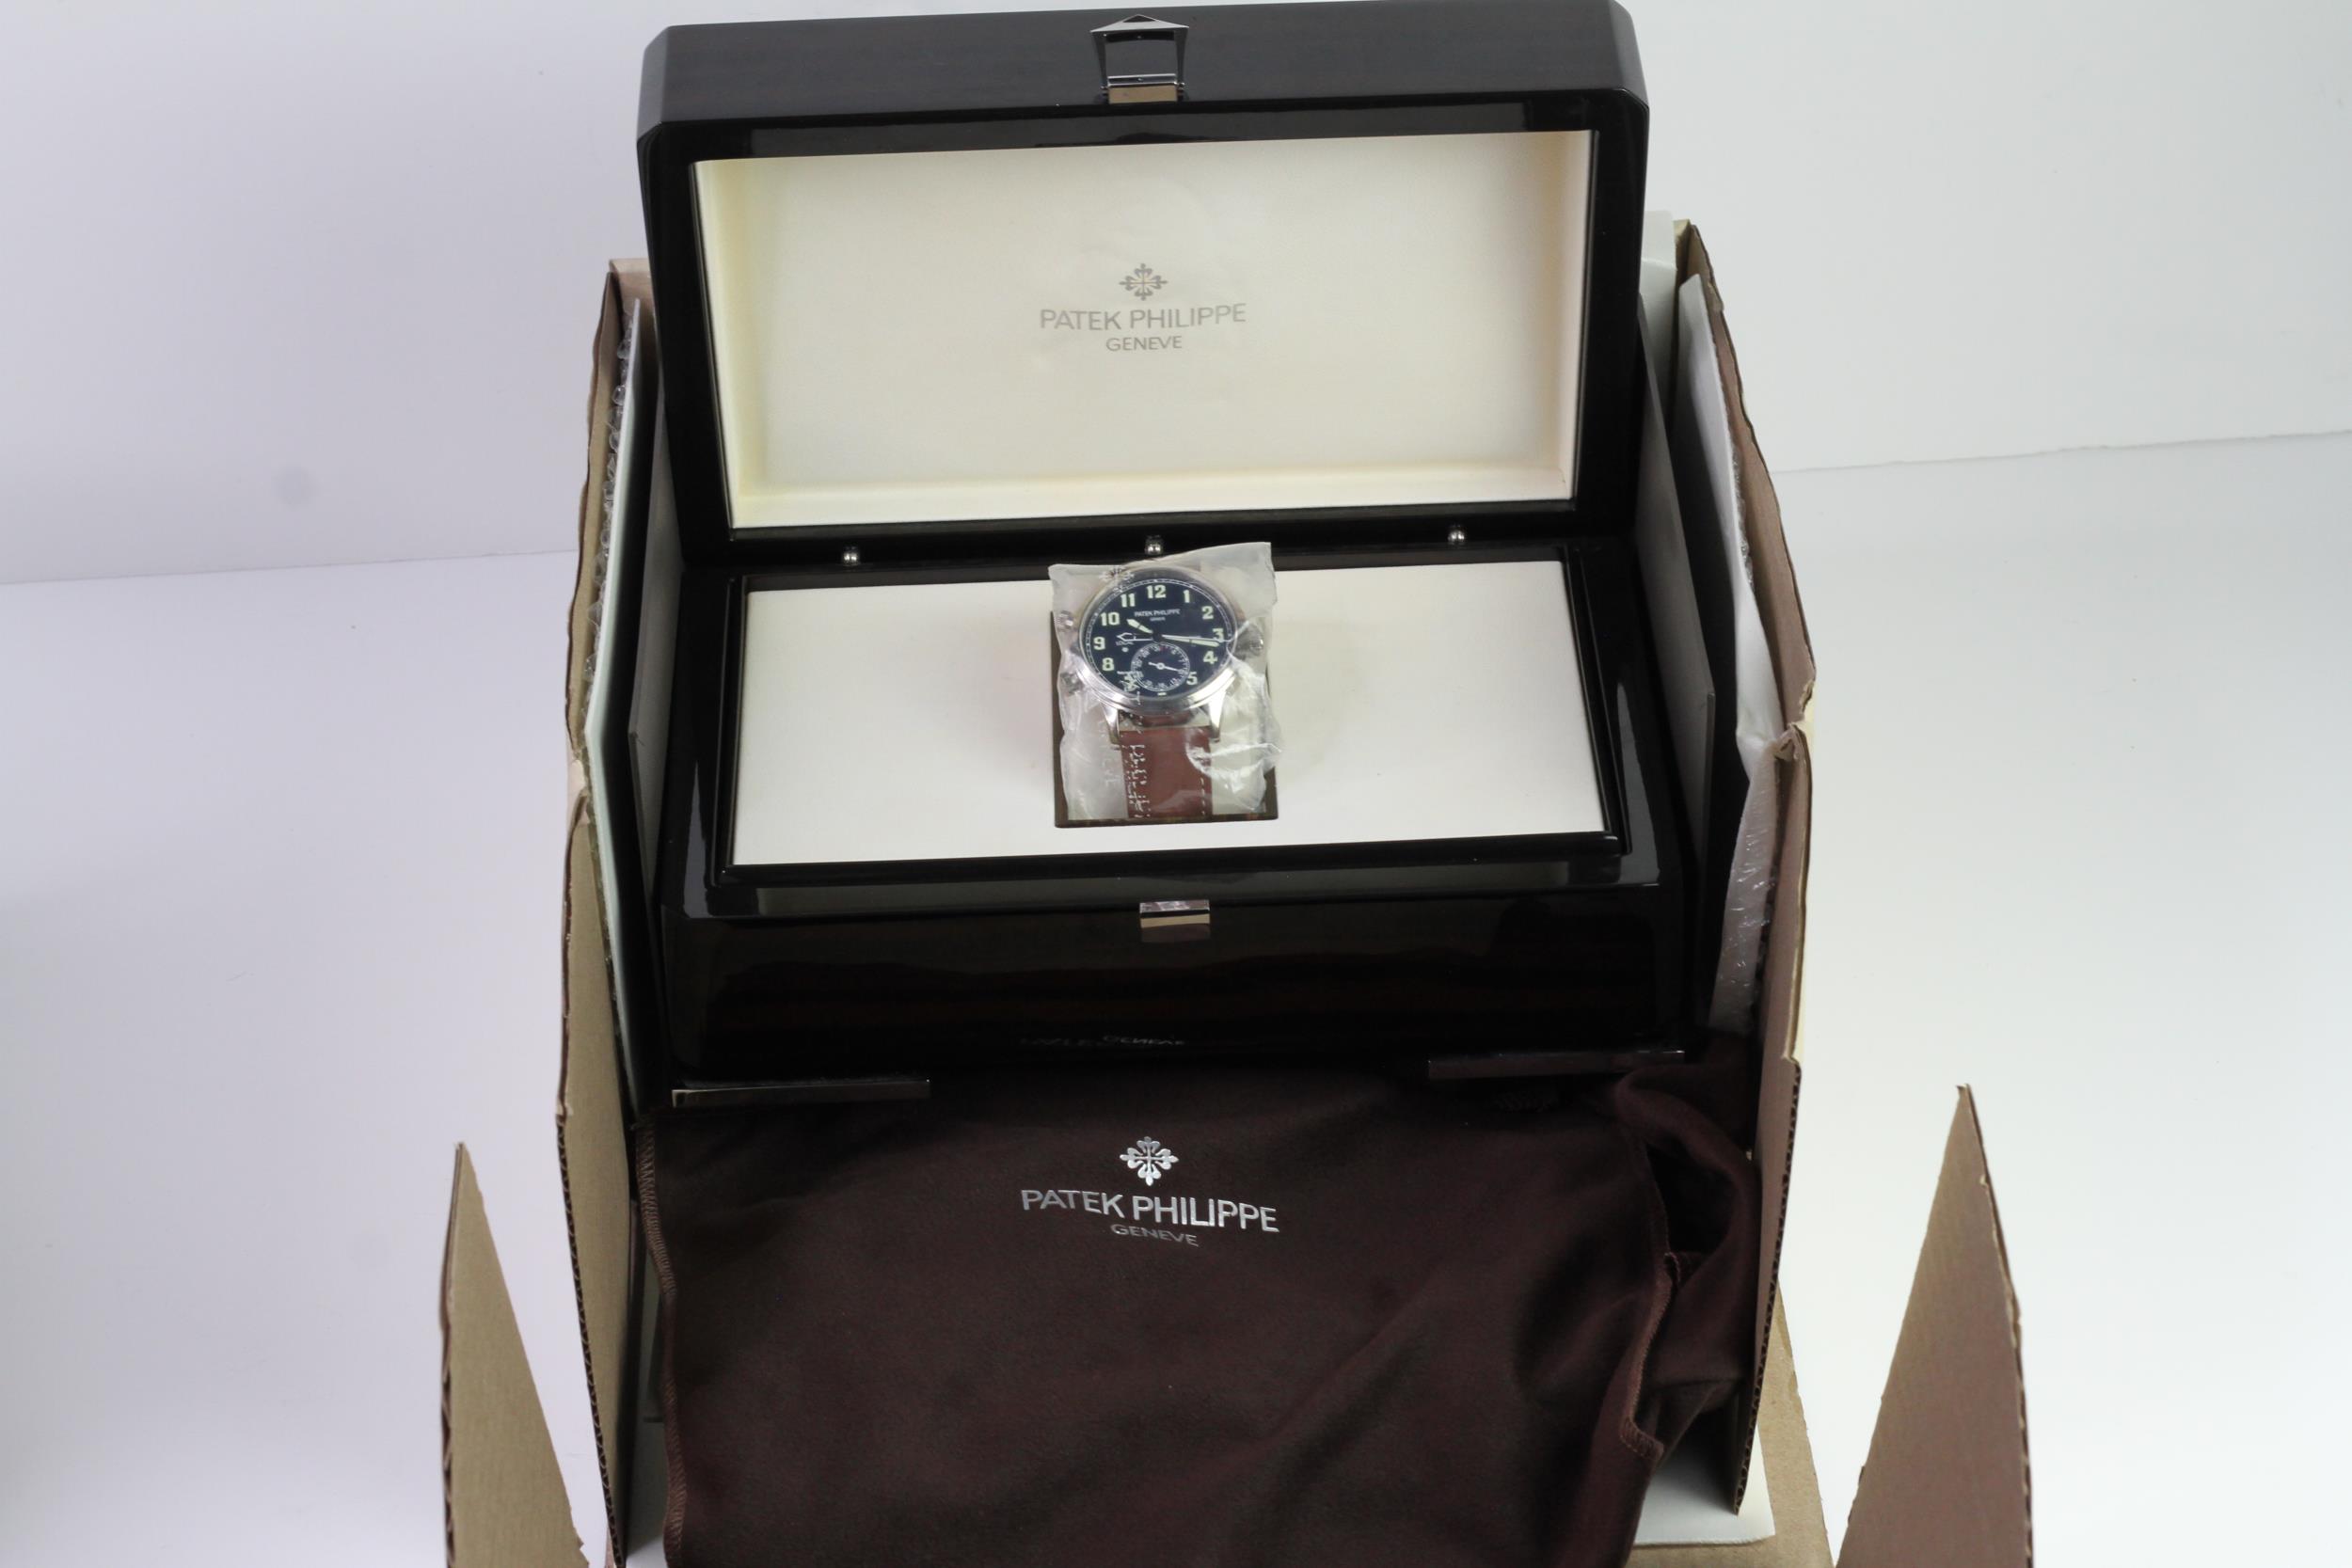 A FINE PATEK PHILIPPE CALATRAVA PILOT TRAVEL TIME REFERENCE 5224G-001, SEALED FROM SERVICE, WITH BOX - Image 16 of 19